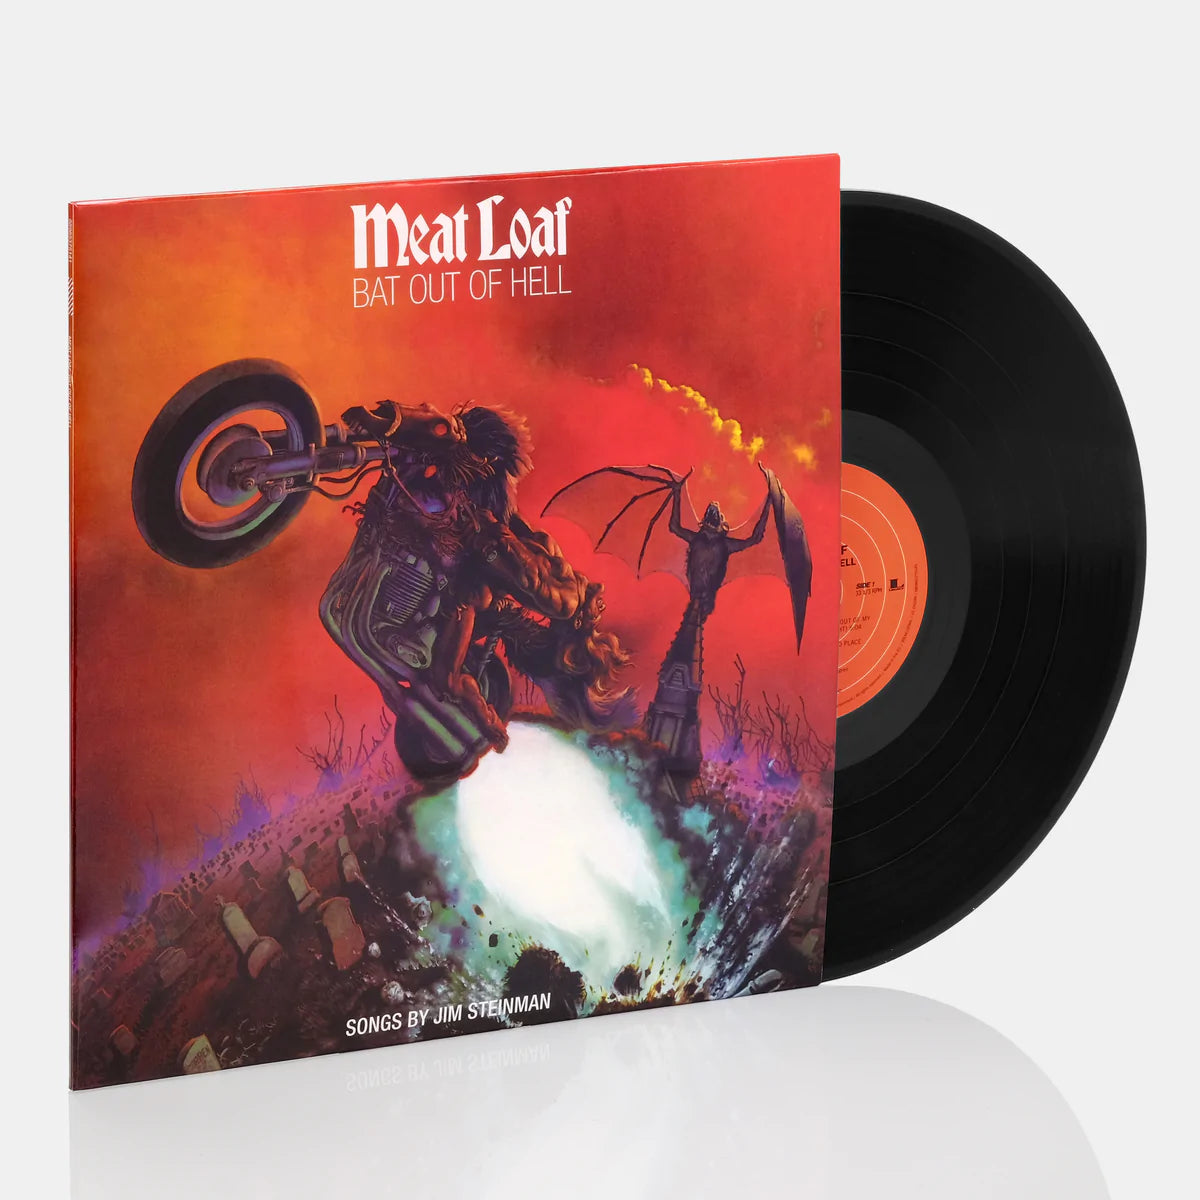 Meat Loaf - Bat Out of Hell (Distro Title)